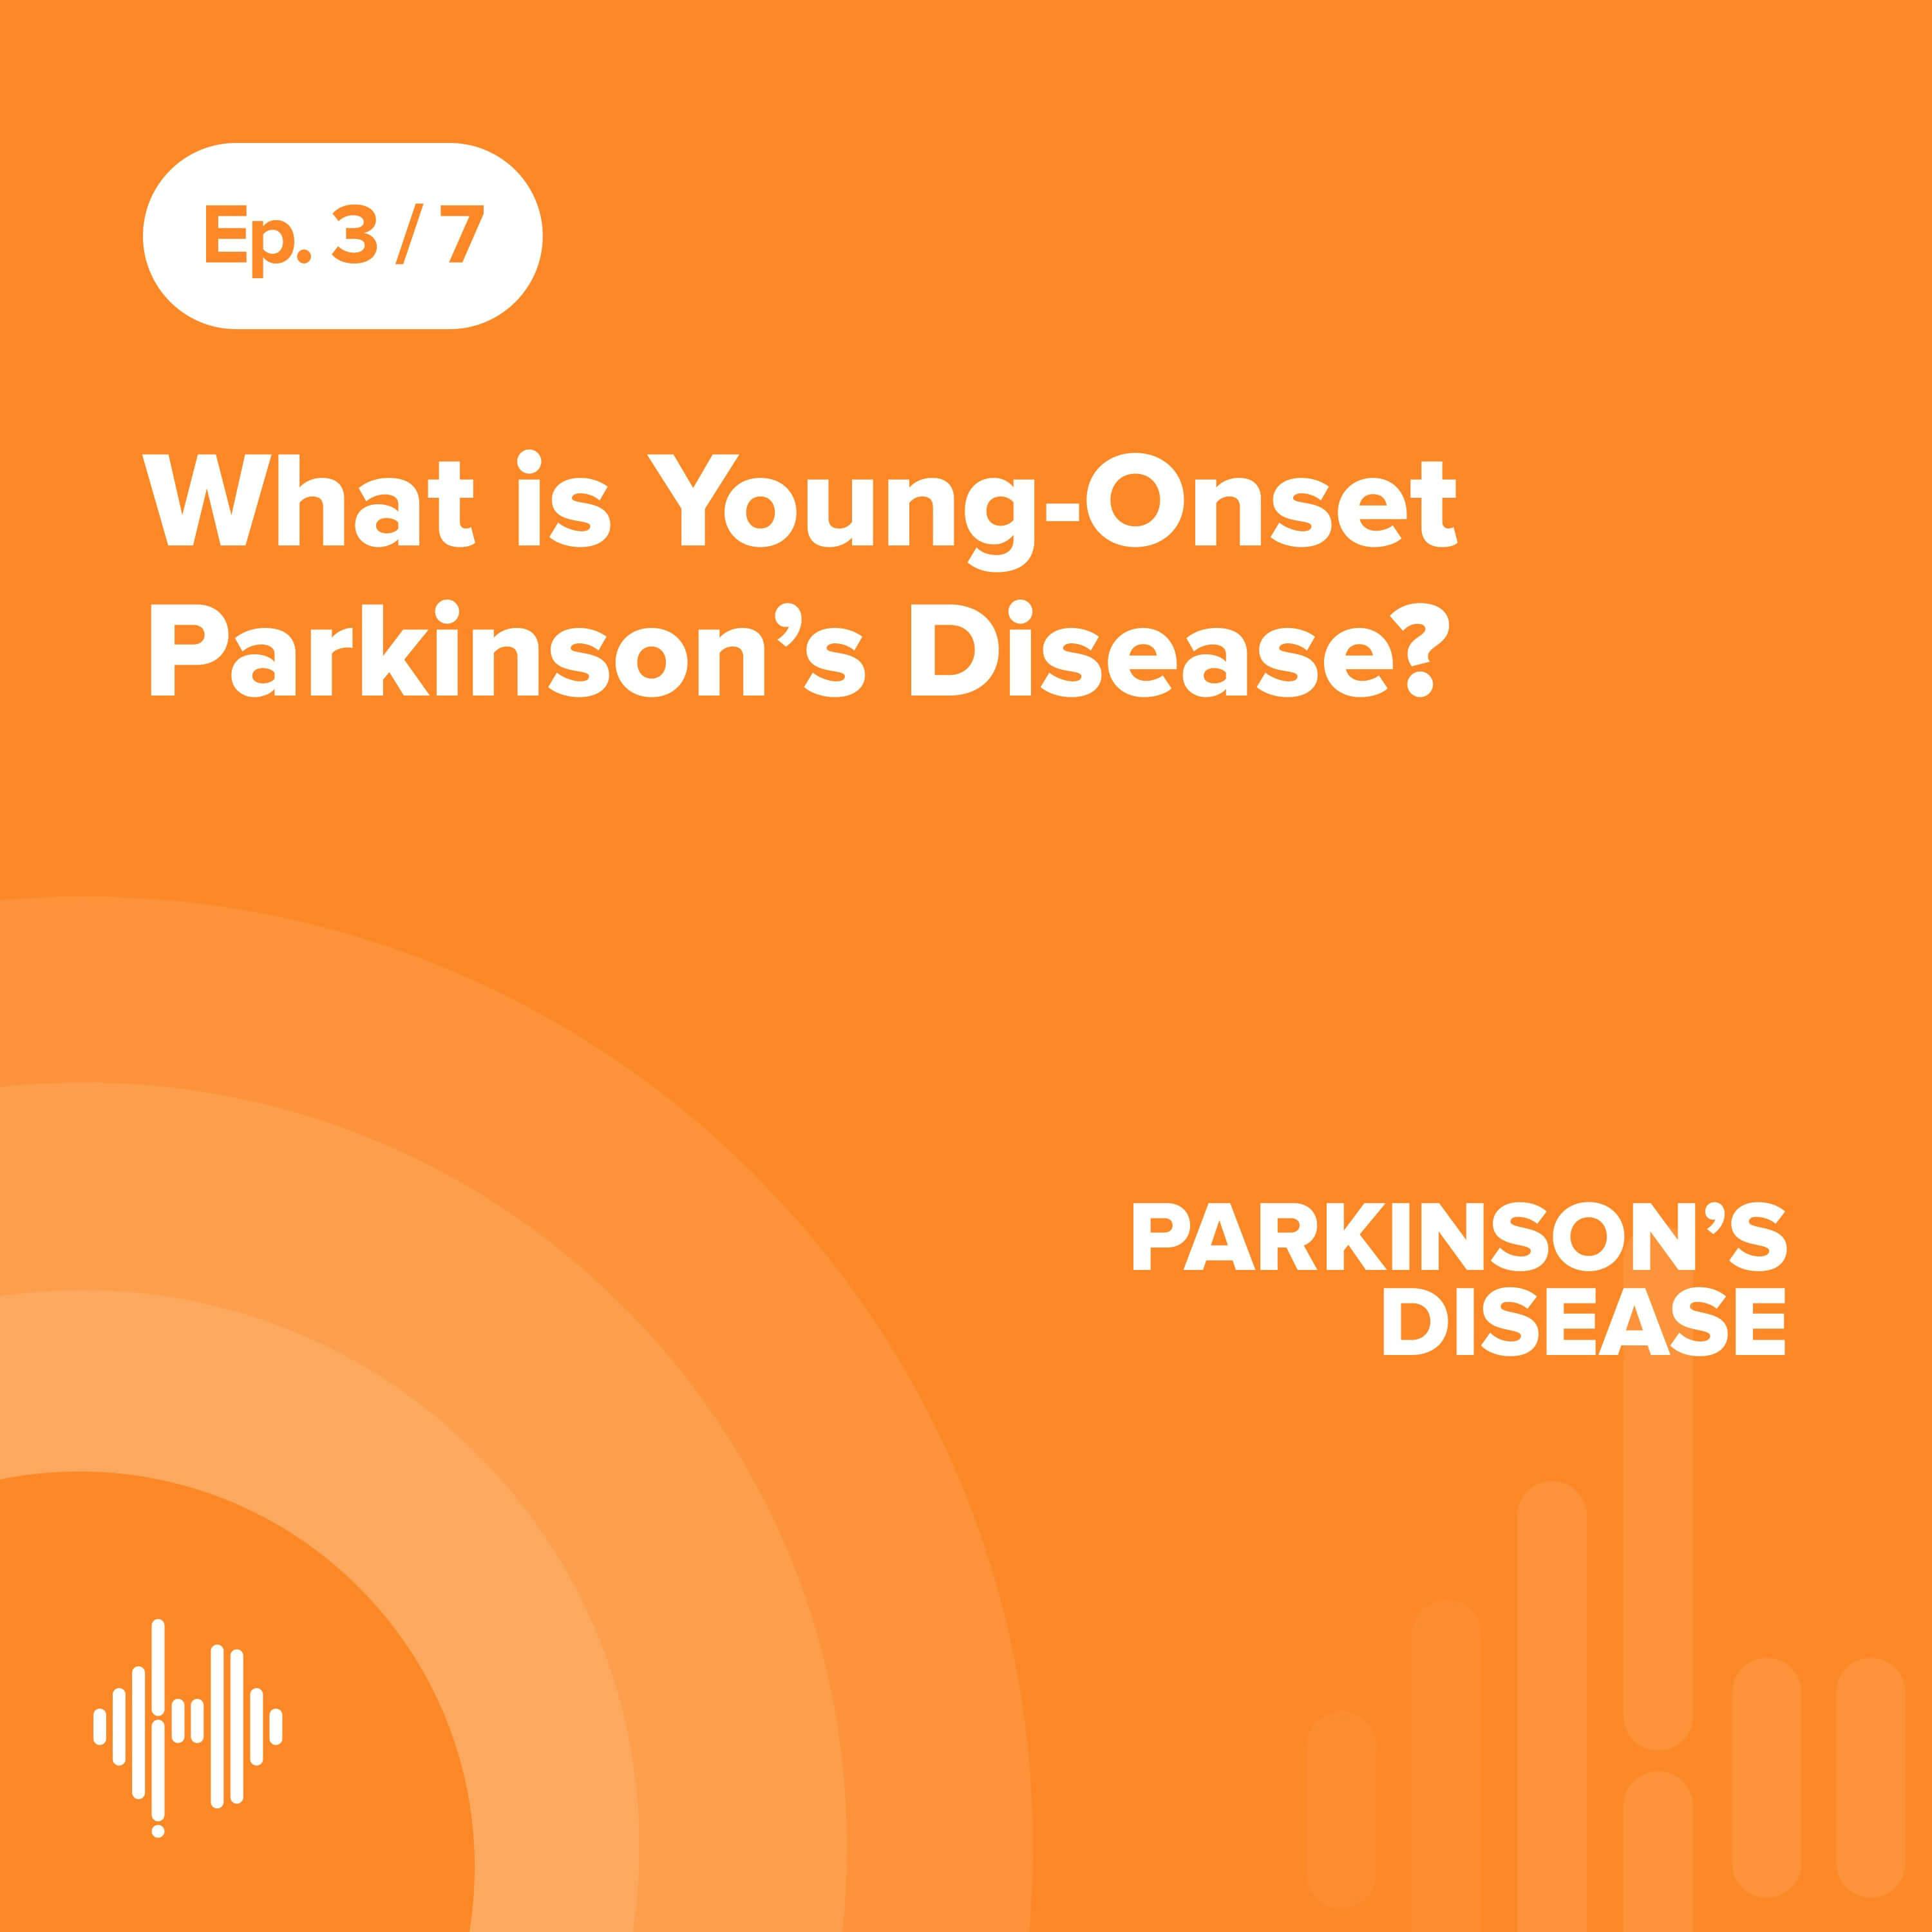 Ep 3: What Is Young-Onset Parkinson’s Disease?